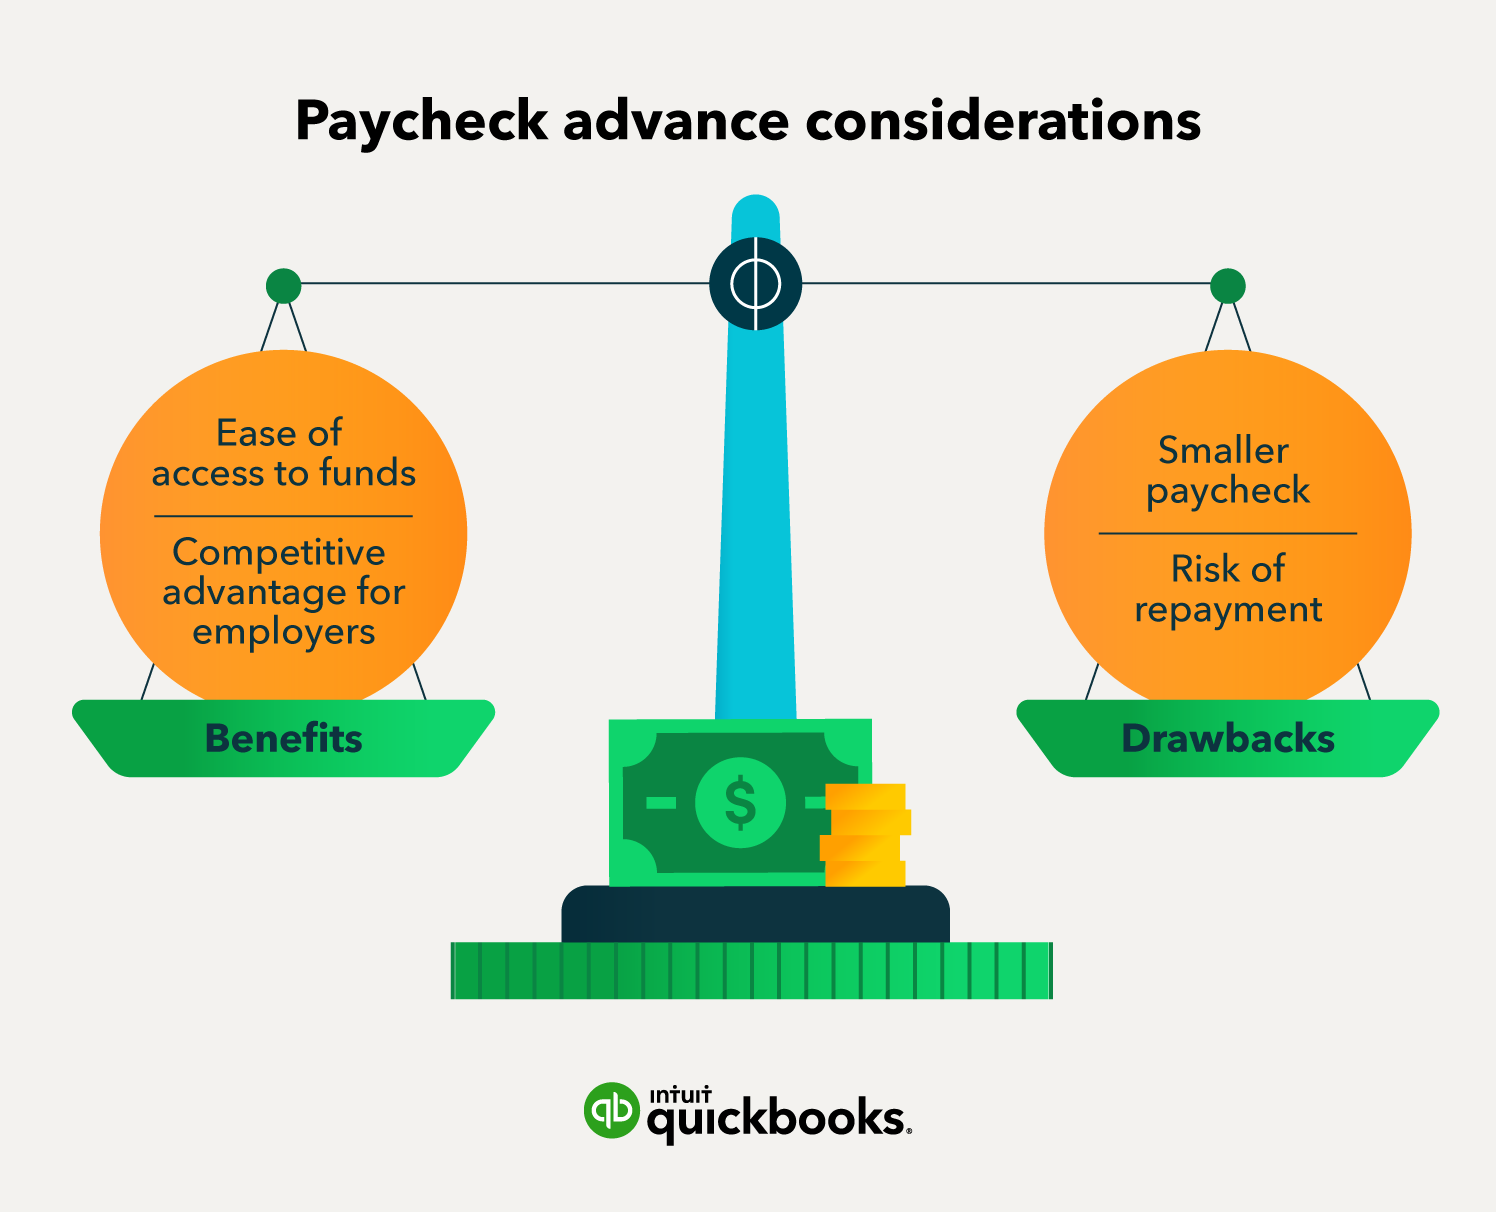 Paycheck advance: how to help your employees - Article